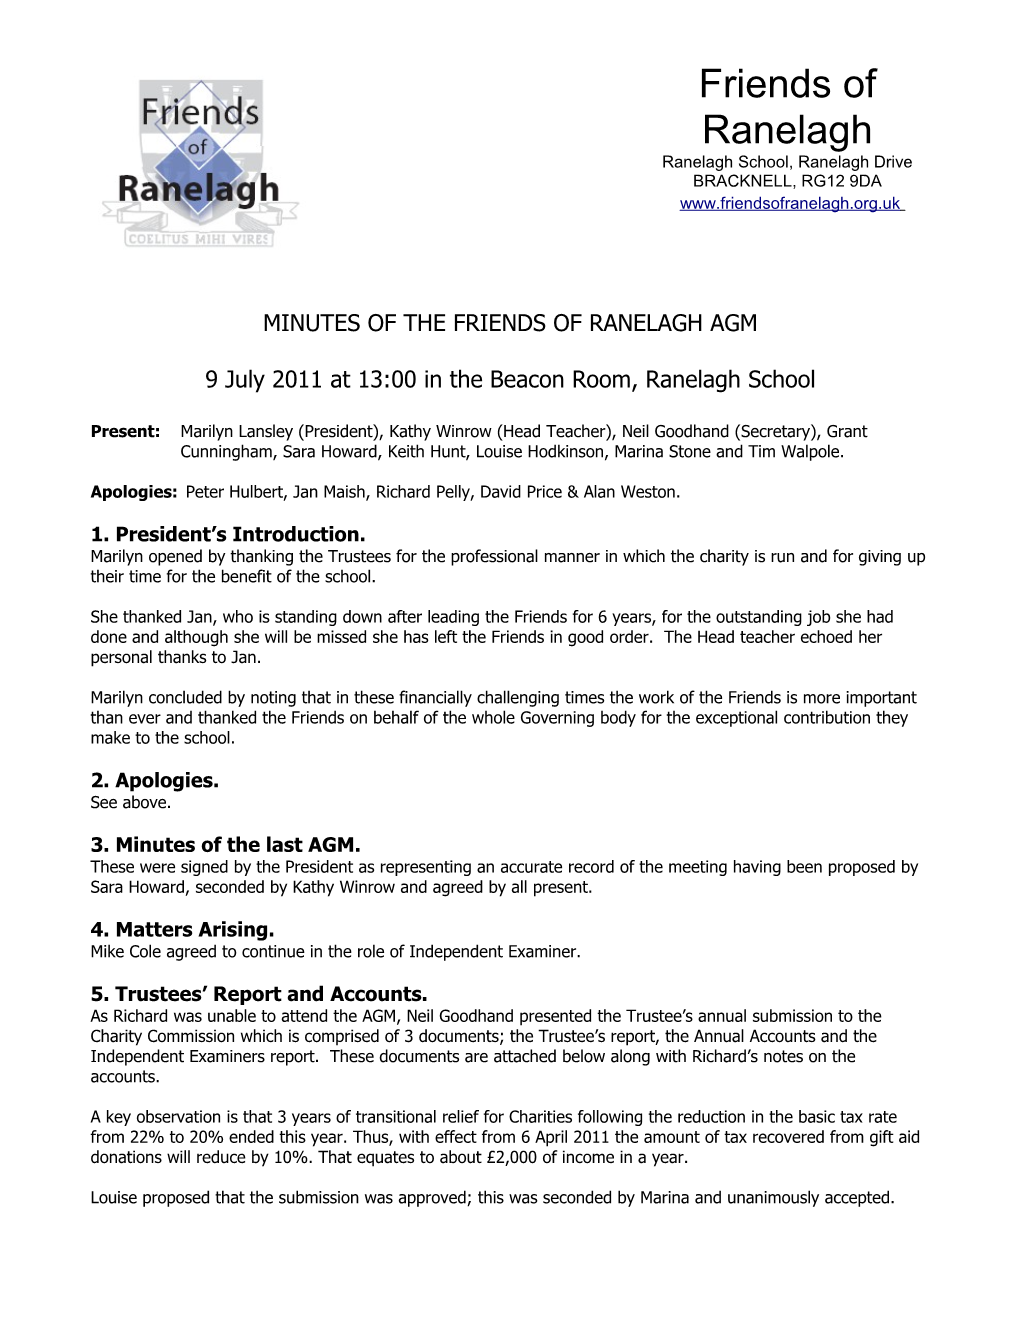 Minutes of the Friends of Ranelagh Egm